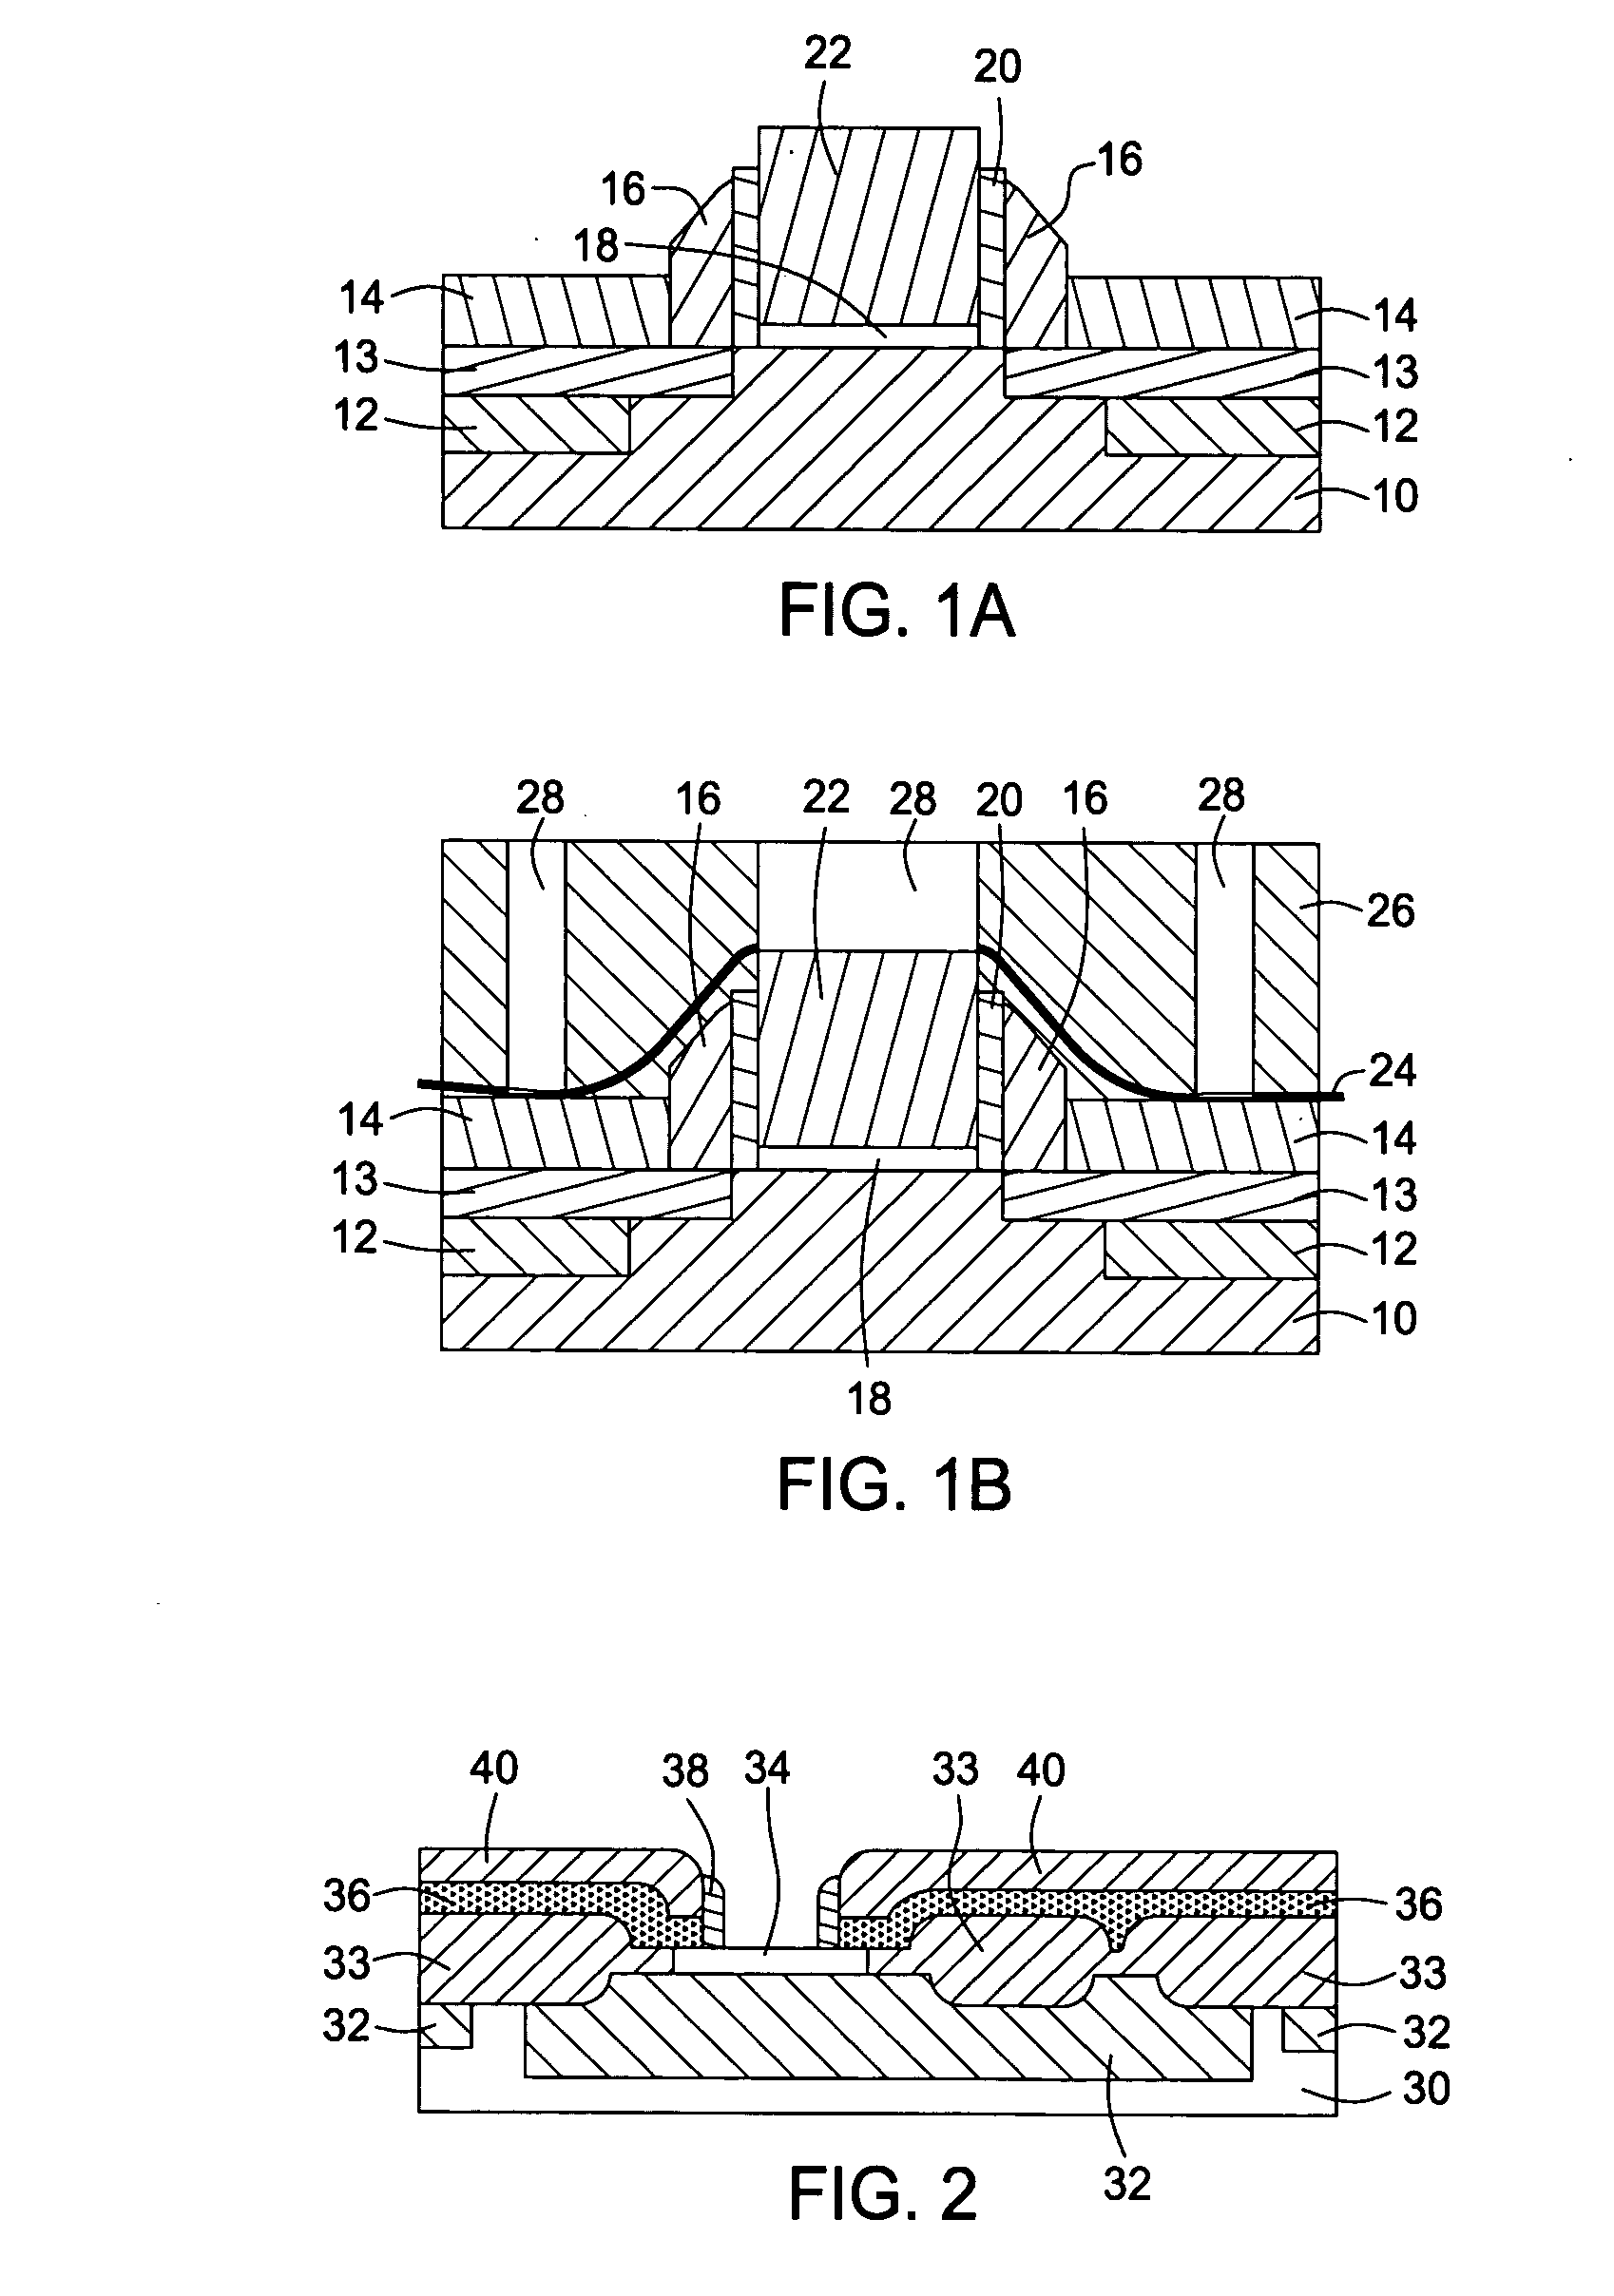 Low thermal budget silicon nitride formation for advance transistor fabrication